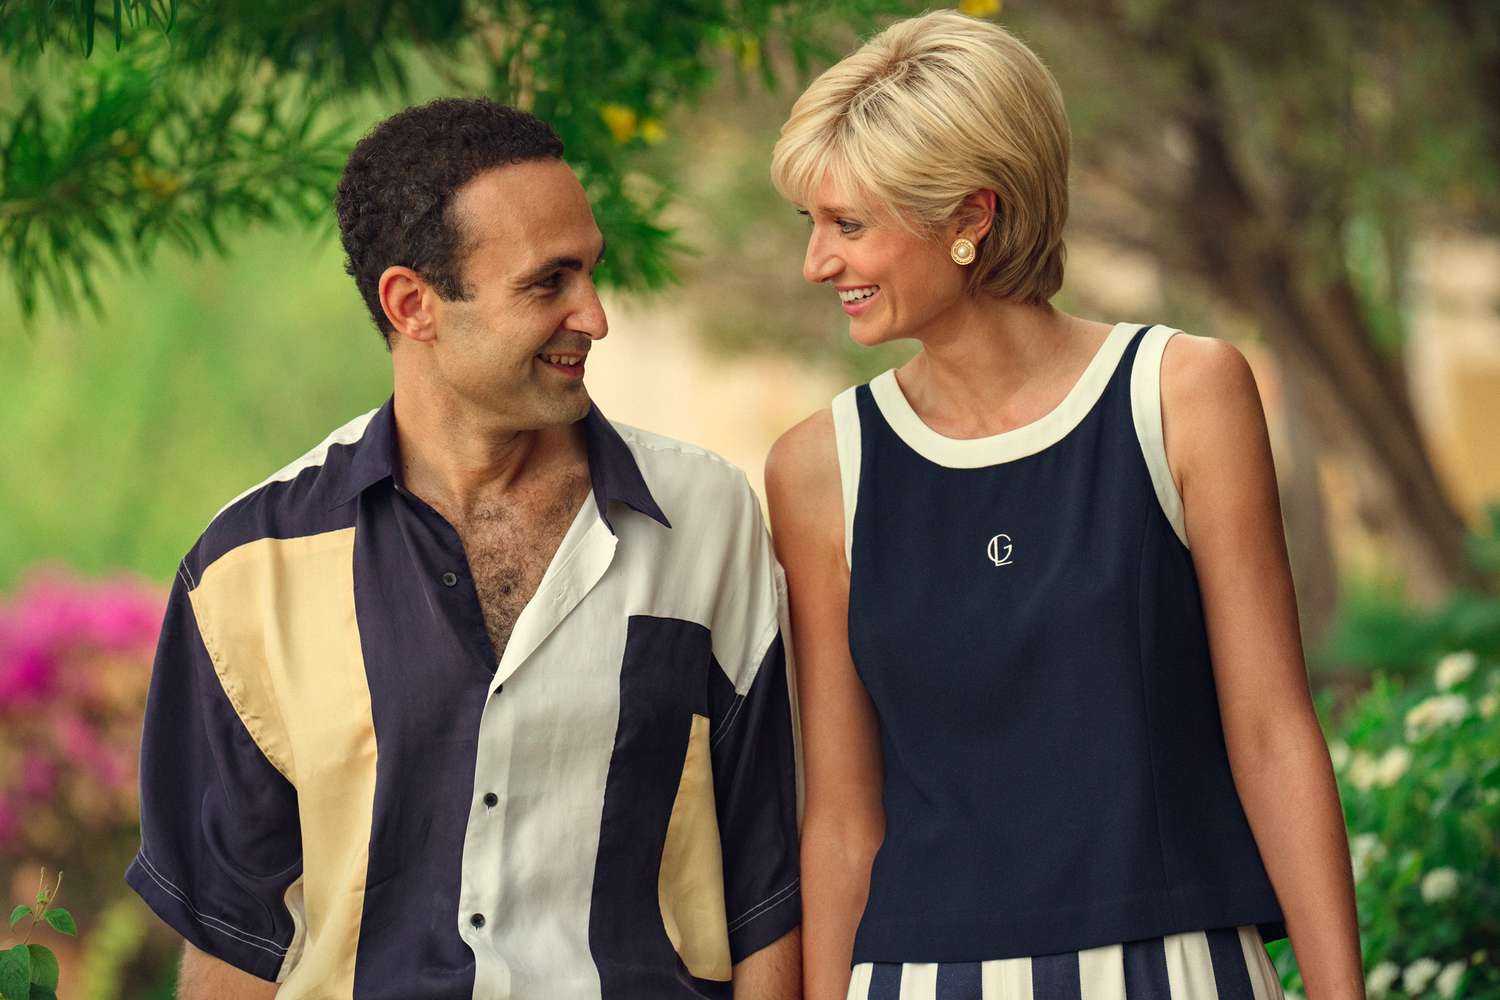 Unraveling the actual love Story: A timeline of Princess Diana and Dodi Al Fayed's romance